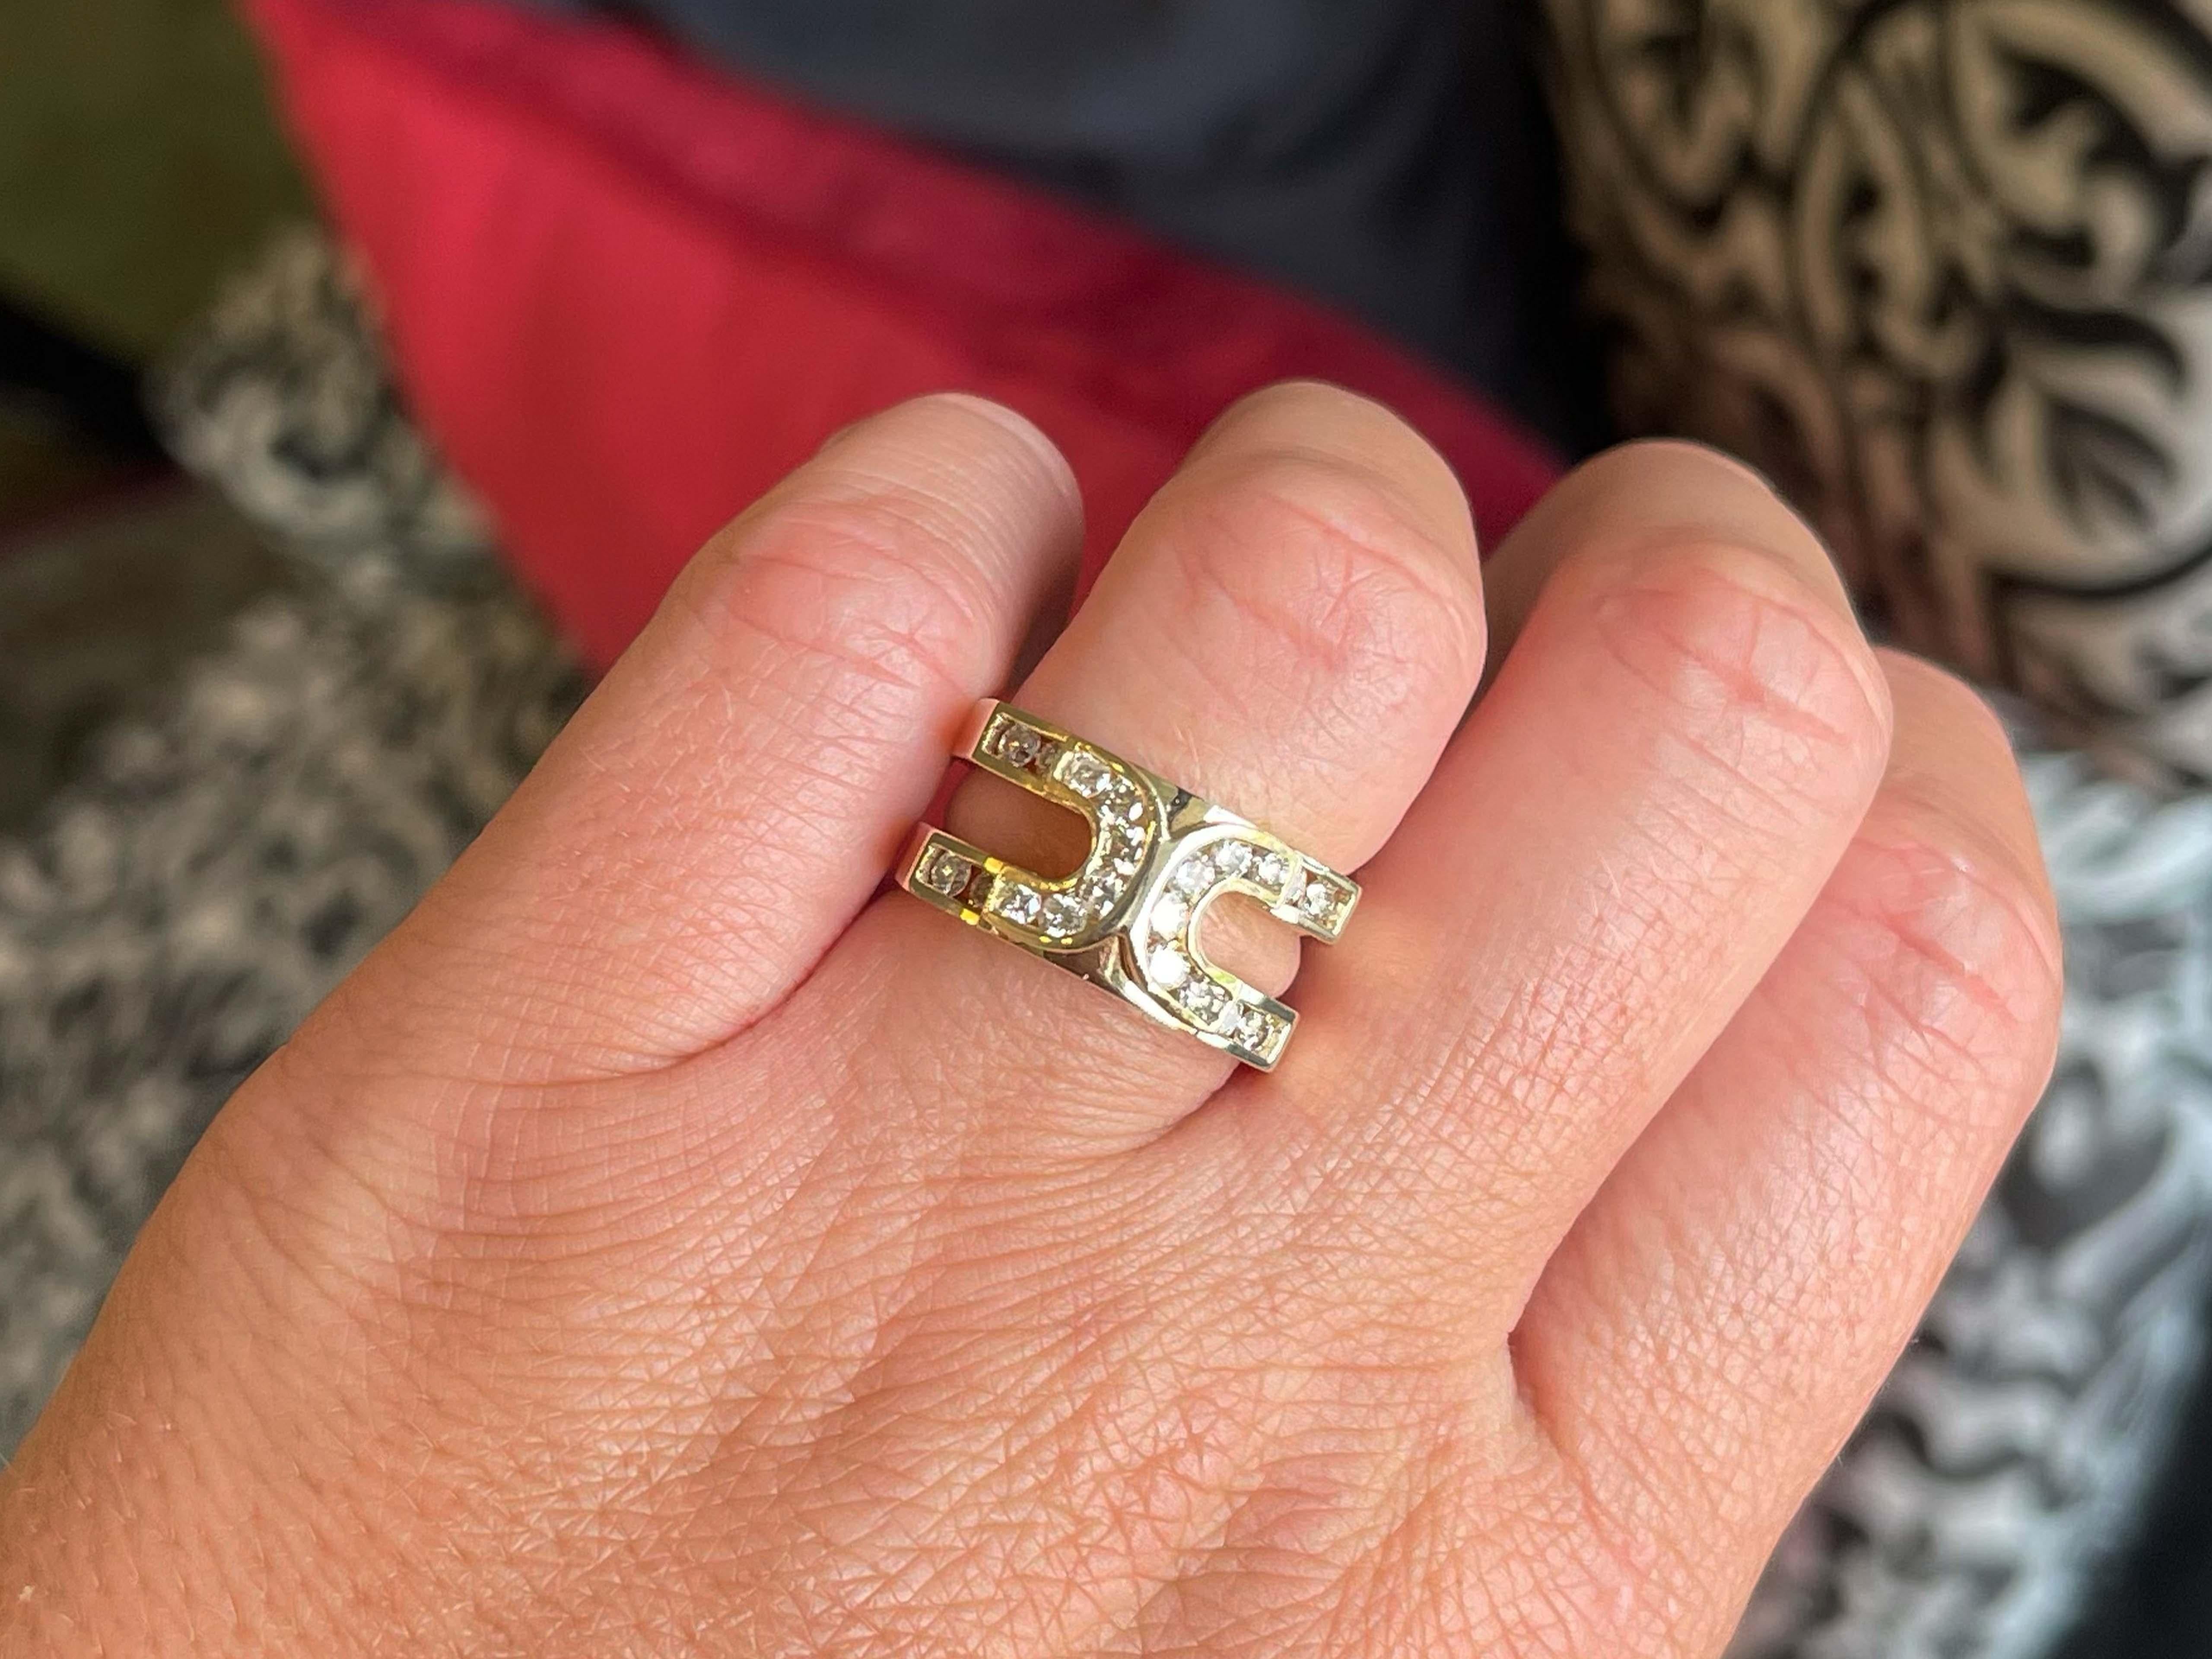 Item Specifications:

Metal: 14K Yellow Gold

​​​Ring Size: 7

Total Weight: 10.0 Grams

Diamond Count: 20 Brilliant cut diamonds

Diamond Carat Weight: ~0.60 Carat

Diamond Color: I-J

Diamond Clarity: SI1-SI2

Condition: Preowned, excellent